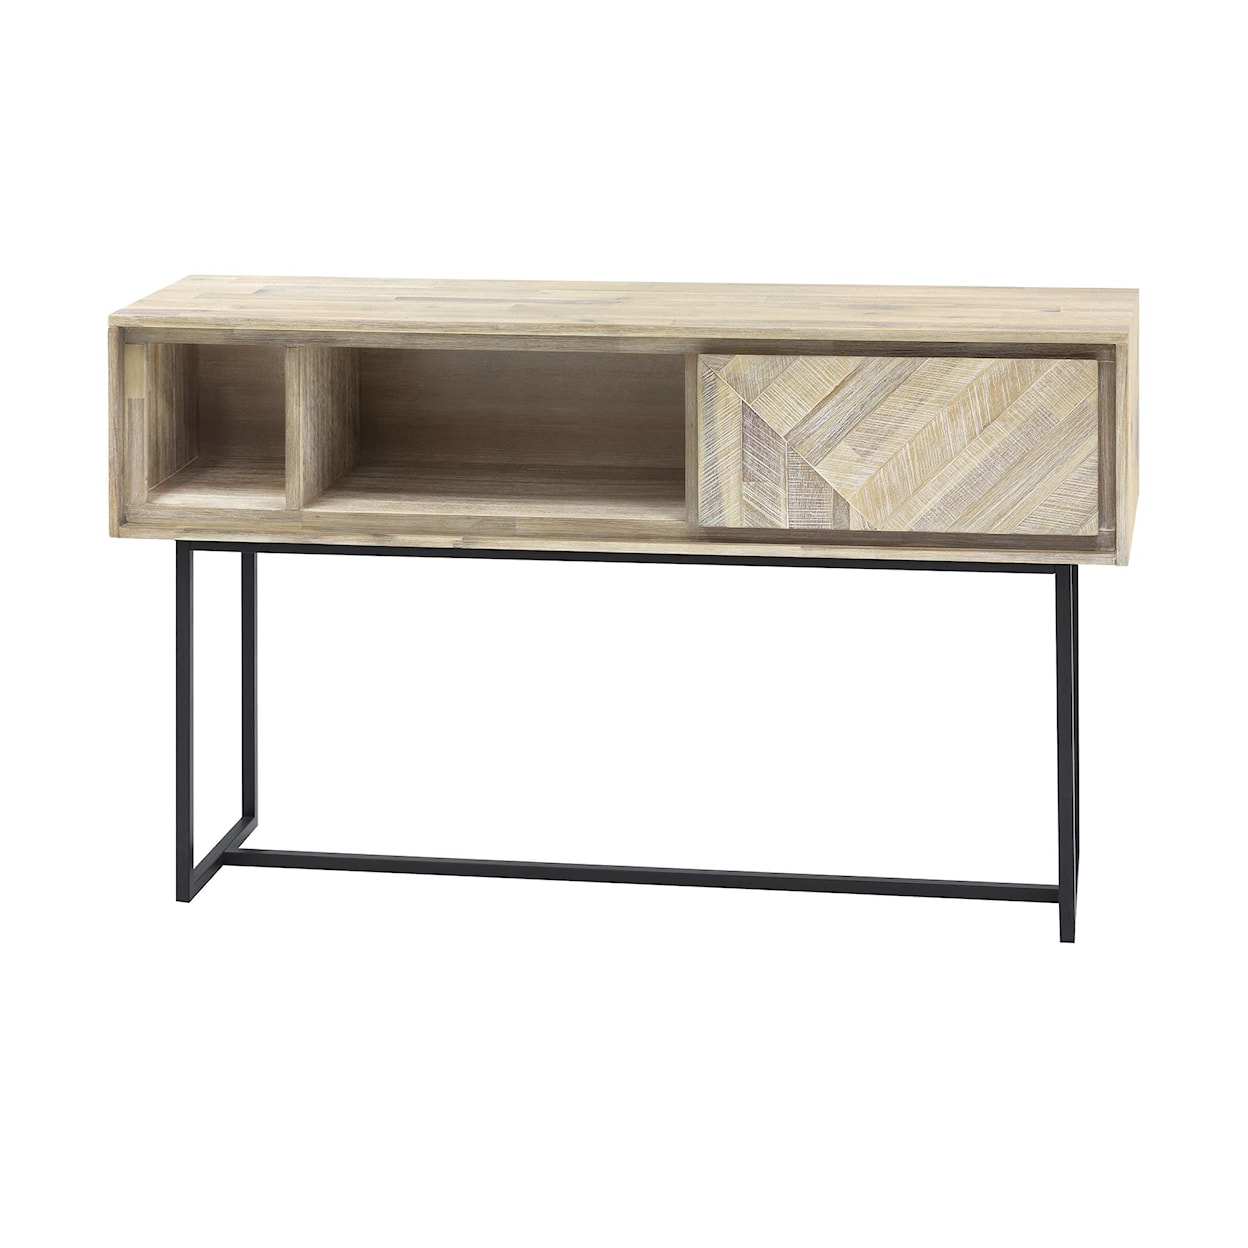 Armen Living Peridot Drawer Console Table in Natural Acacia Wood